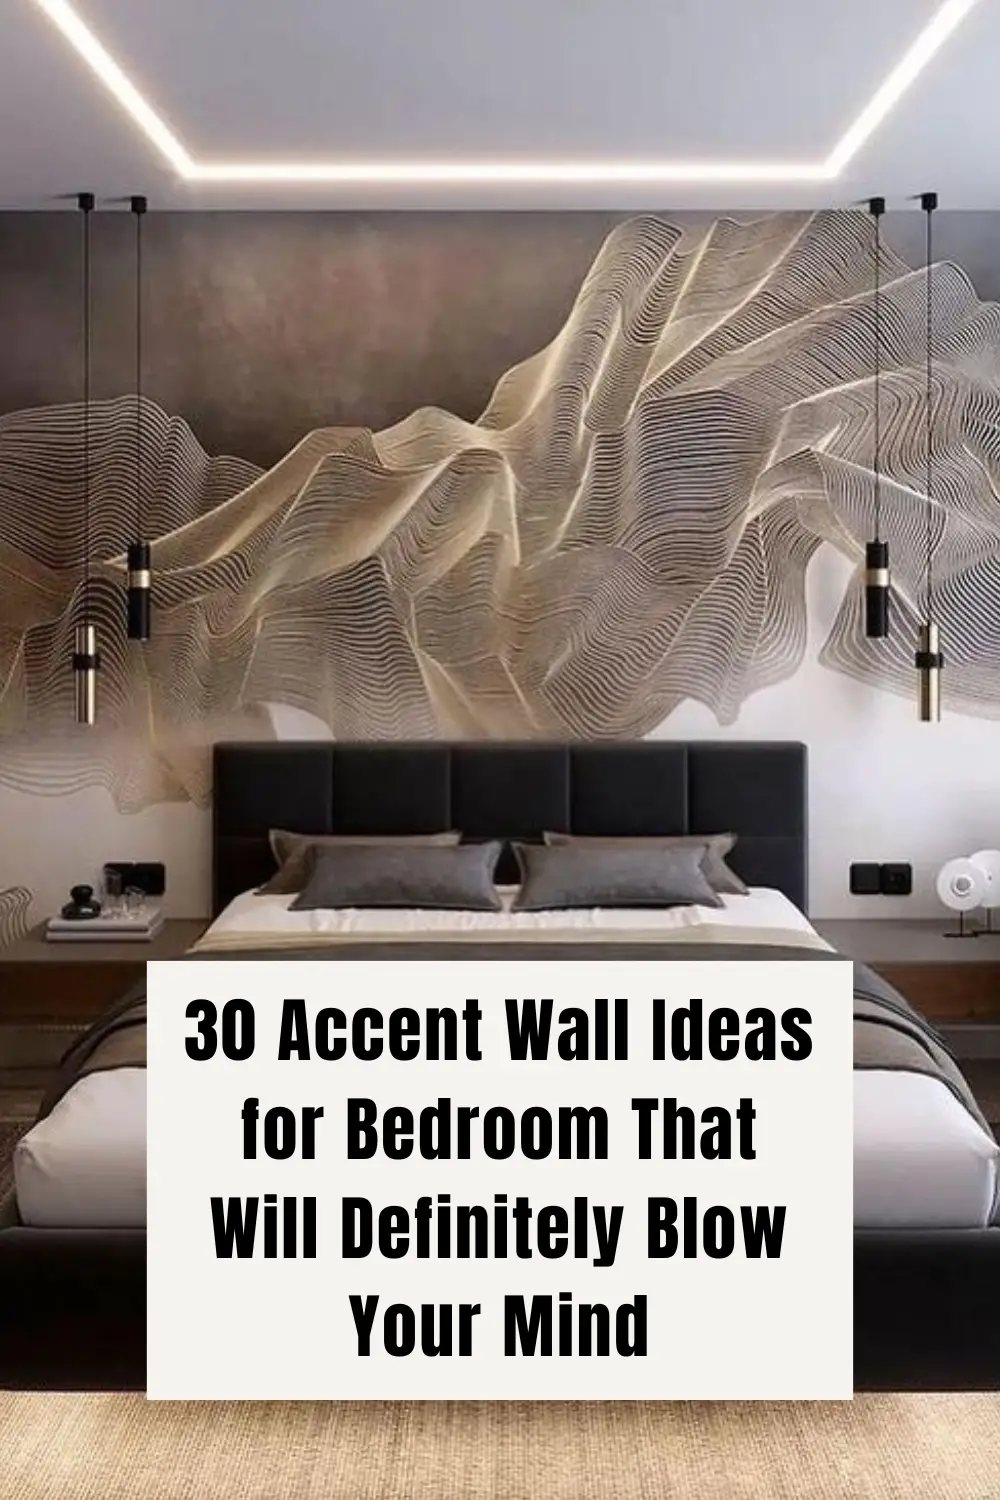 Accent Wall Ideas for Bedroom